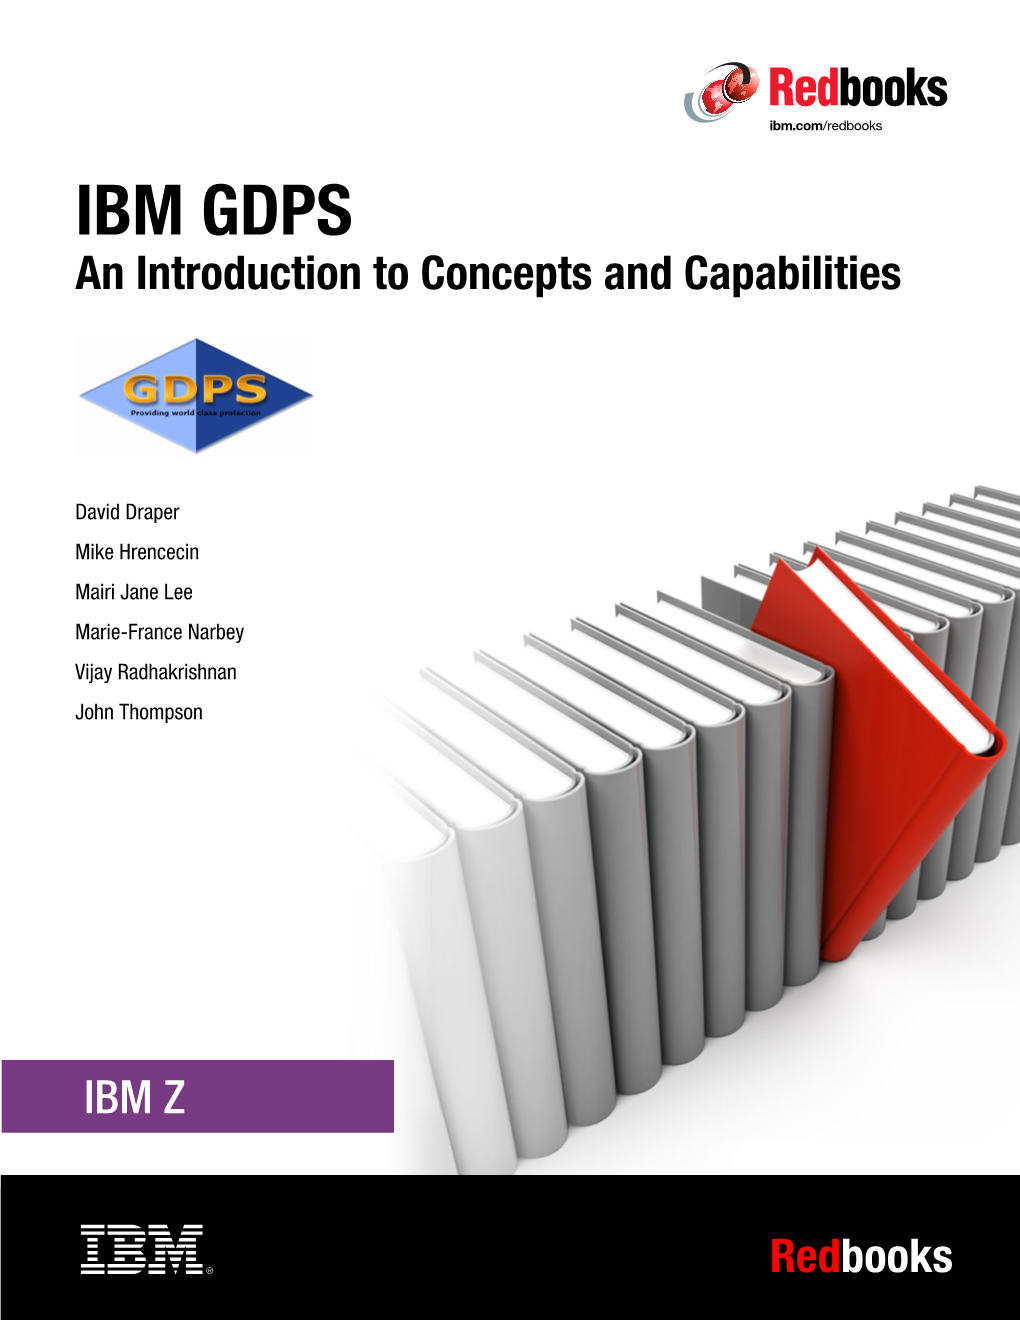 IBM GDPS: an Introduction to Concepts and Capabilities